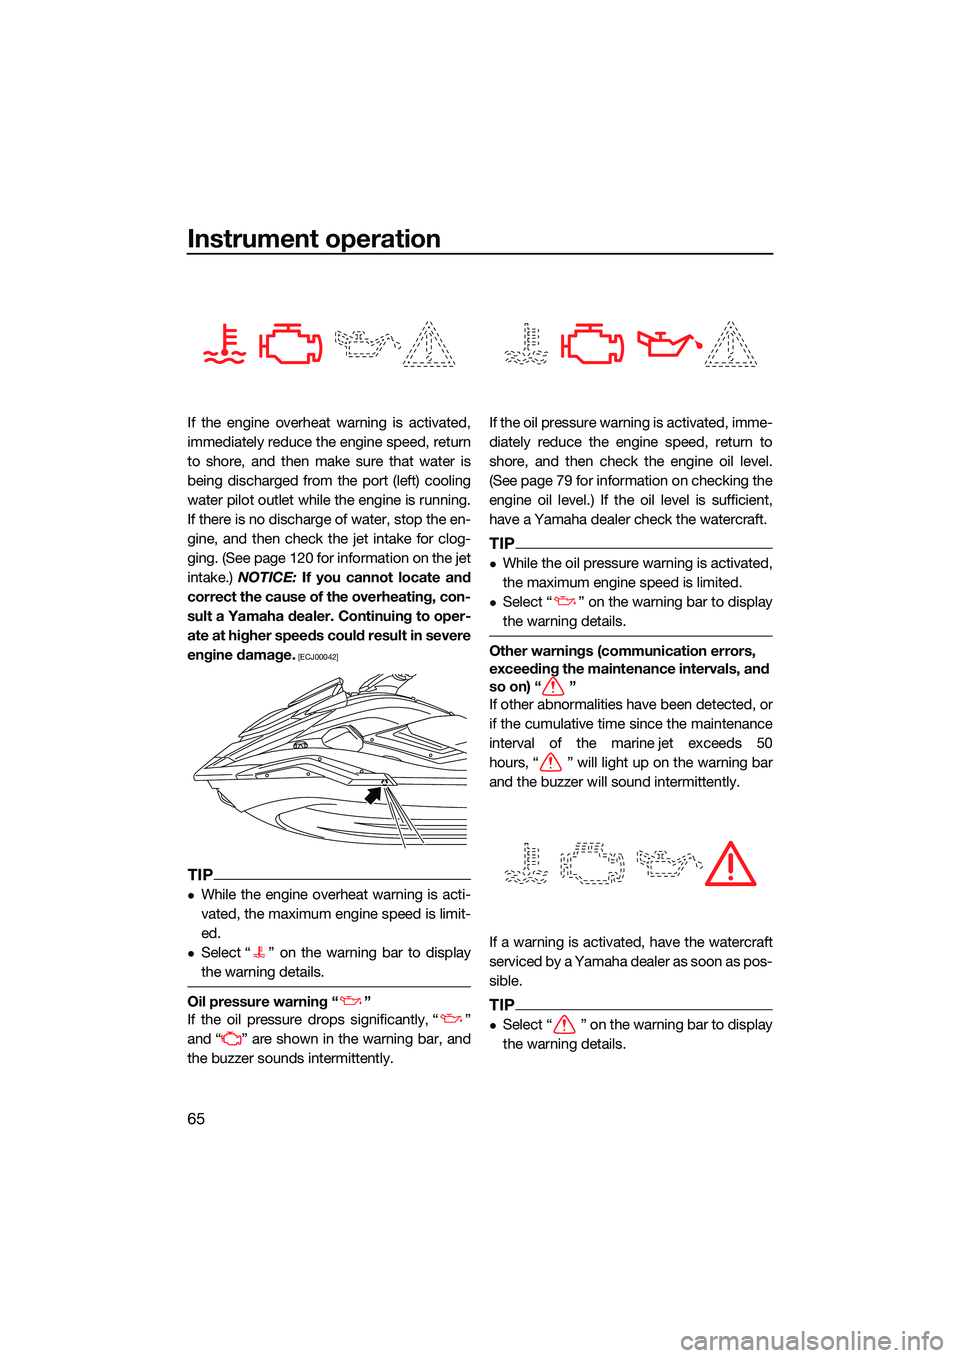 YAMAHA FX HO CRUISER 2022 Manual PDF Instrument operation
65
If the engine overheat warning is activated,
immediately reduce the engine speed, return
to shore, and then make sure that water is
being discharged from the port (left) coolin